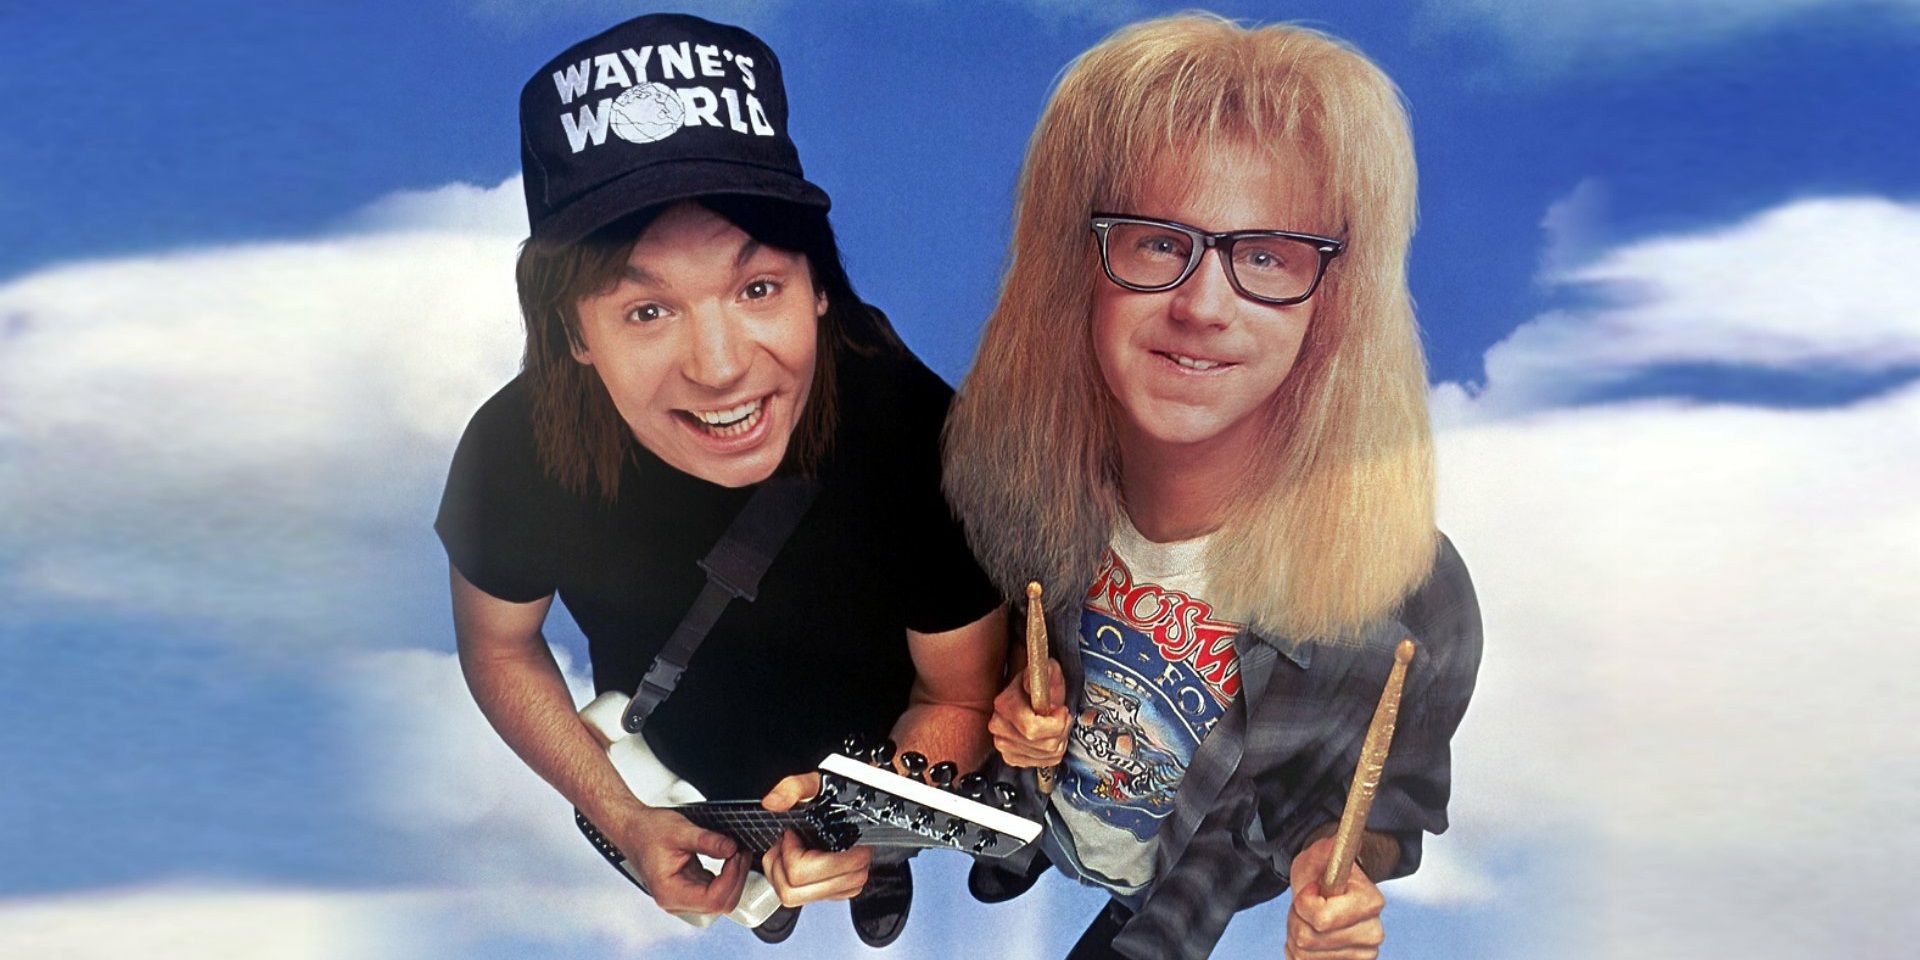 Wayne's World 3 Is The Legacy Sequel We Need